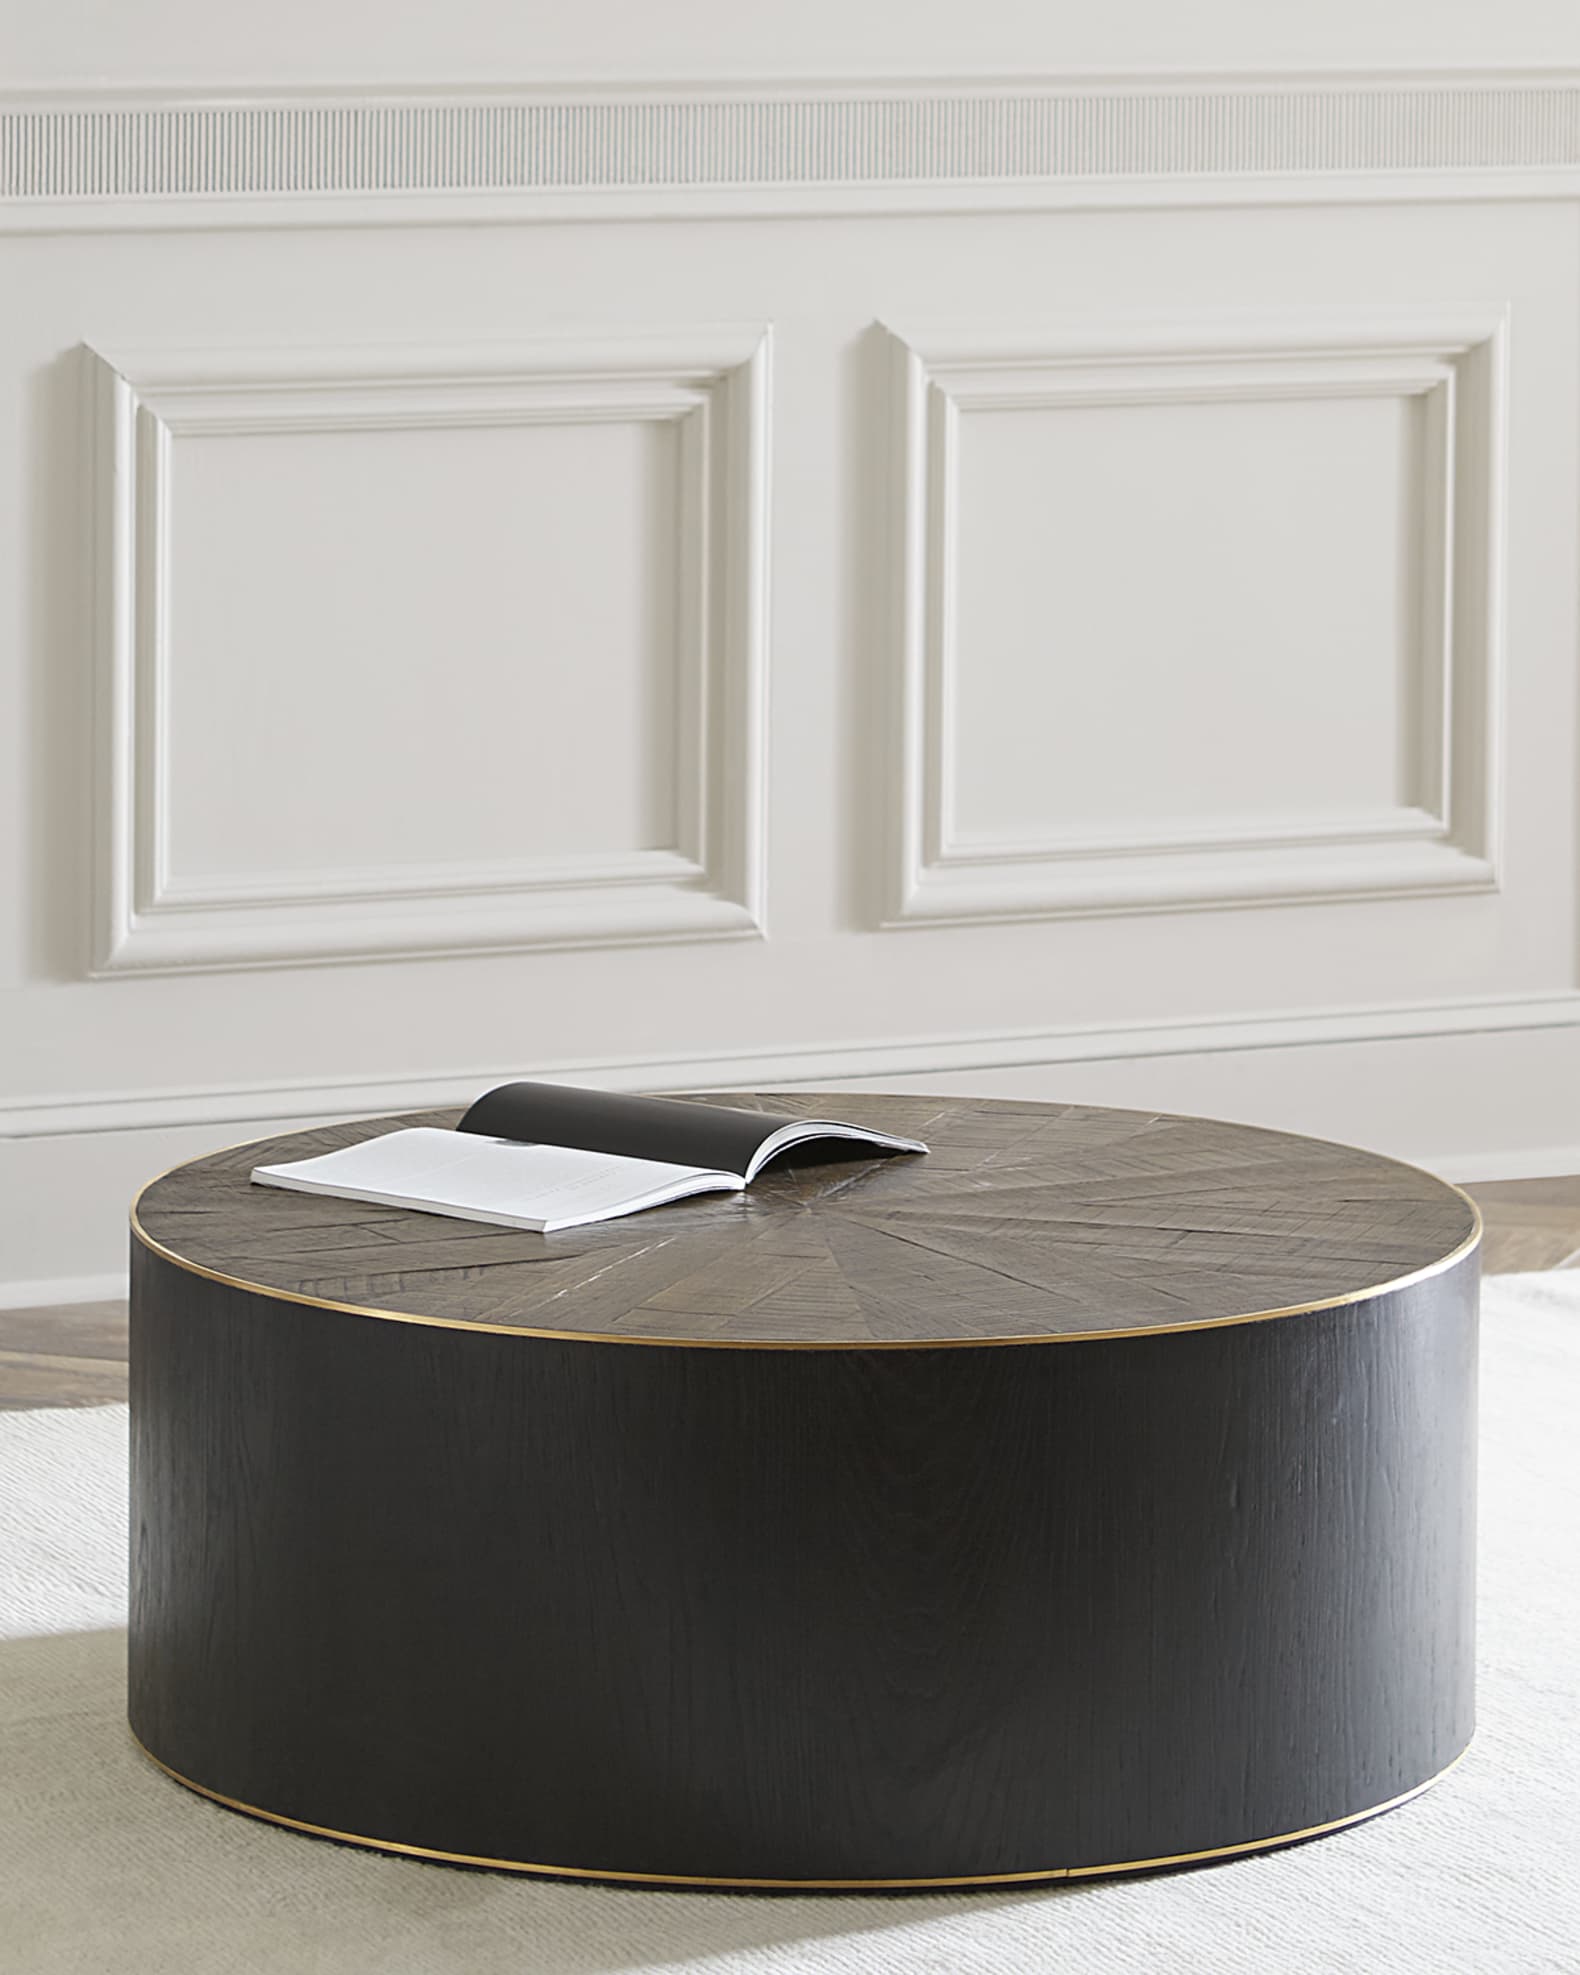 Four Hands Lucas Round Coffee Table | Horchow